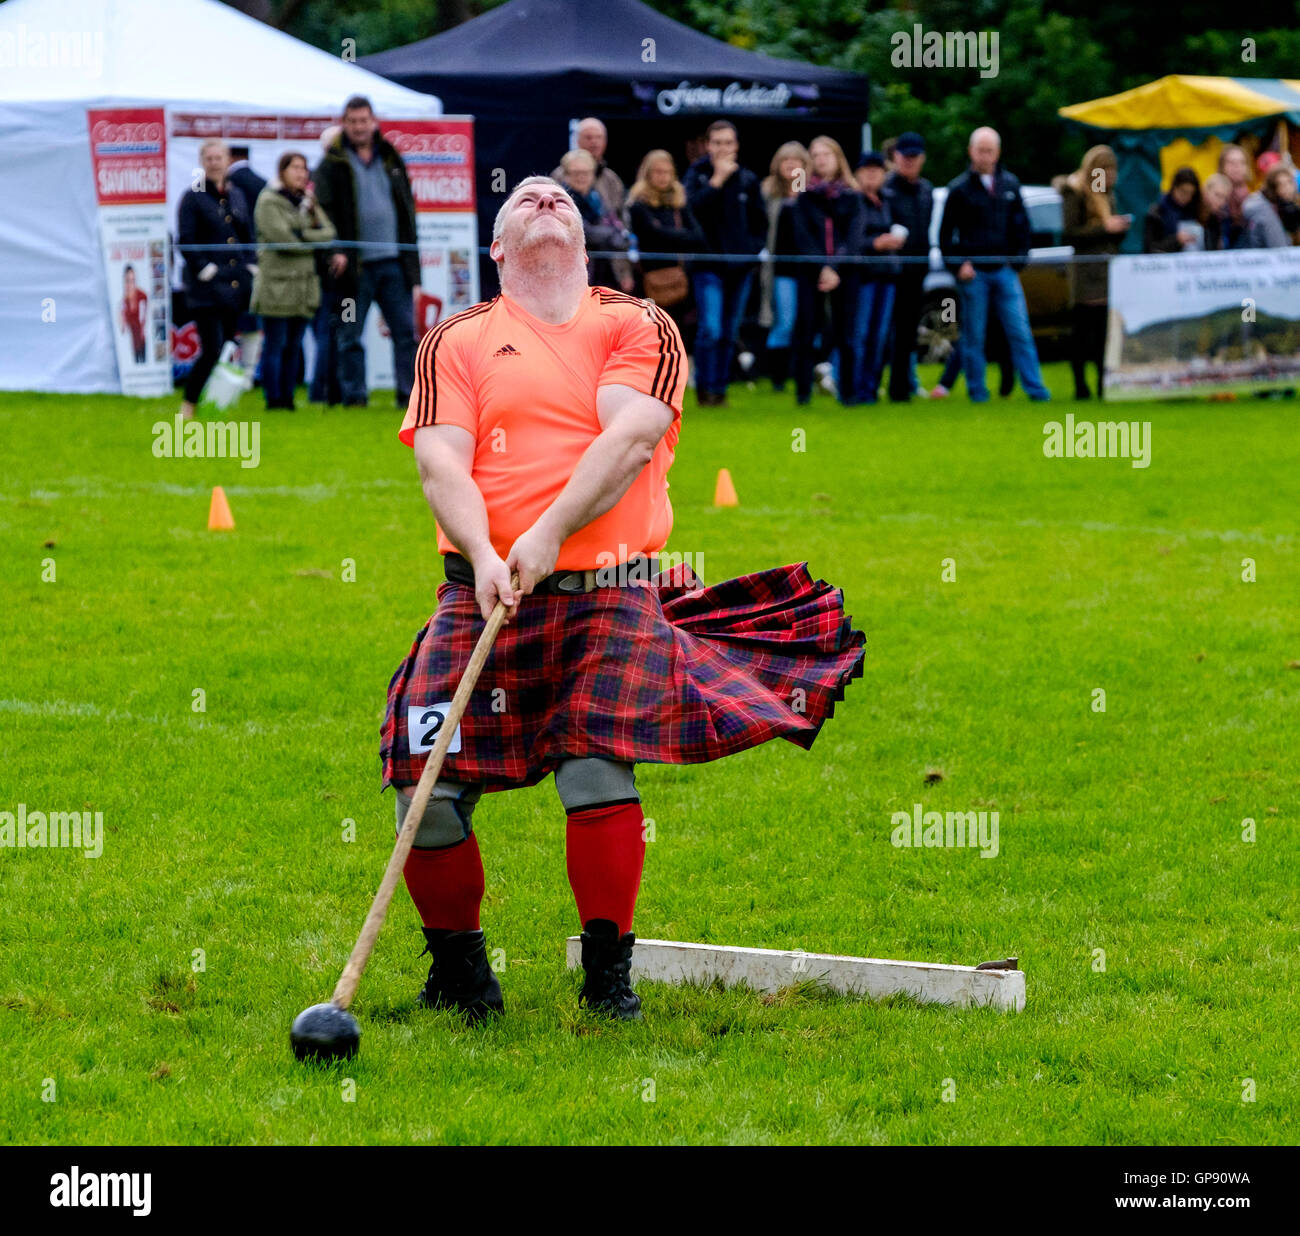 Peebles, Scotland UK  3rd September 2016. Peebles Highland Games, the biggest 'highland' games in the Scottish  Borders took place in Peebles on September 3rd 2016 featuring pipe band contests, highland dancing competitions, haggis hurling, hammer throwing, stone throwing and other traditional events.  Pictured:  a competitor throws the hammer Credit:  Andrew Wilson/Alamy Live News Stock Photo